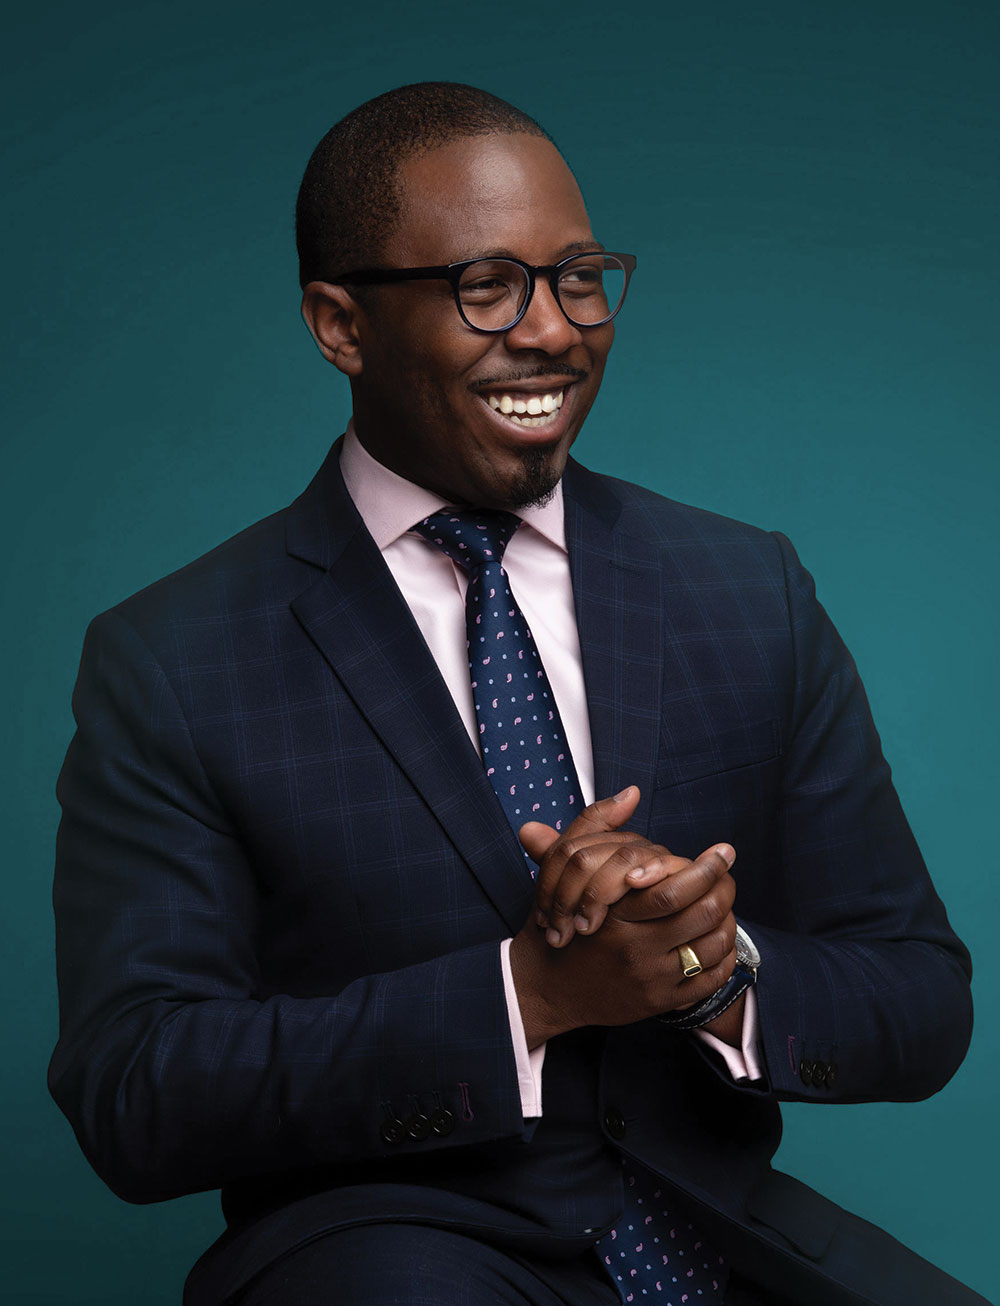 Aziz Garuba is a smiling dark skinned man sitting in front of a turquoise background.